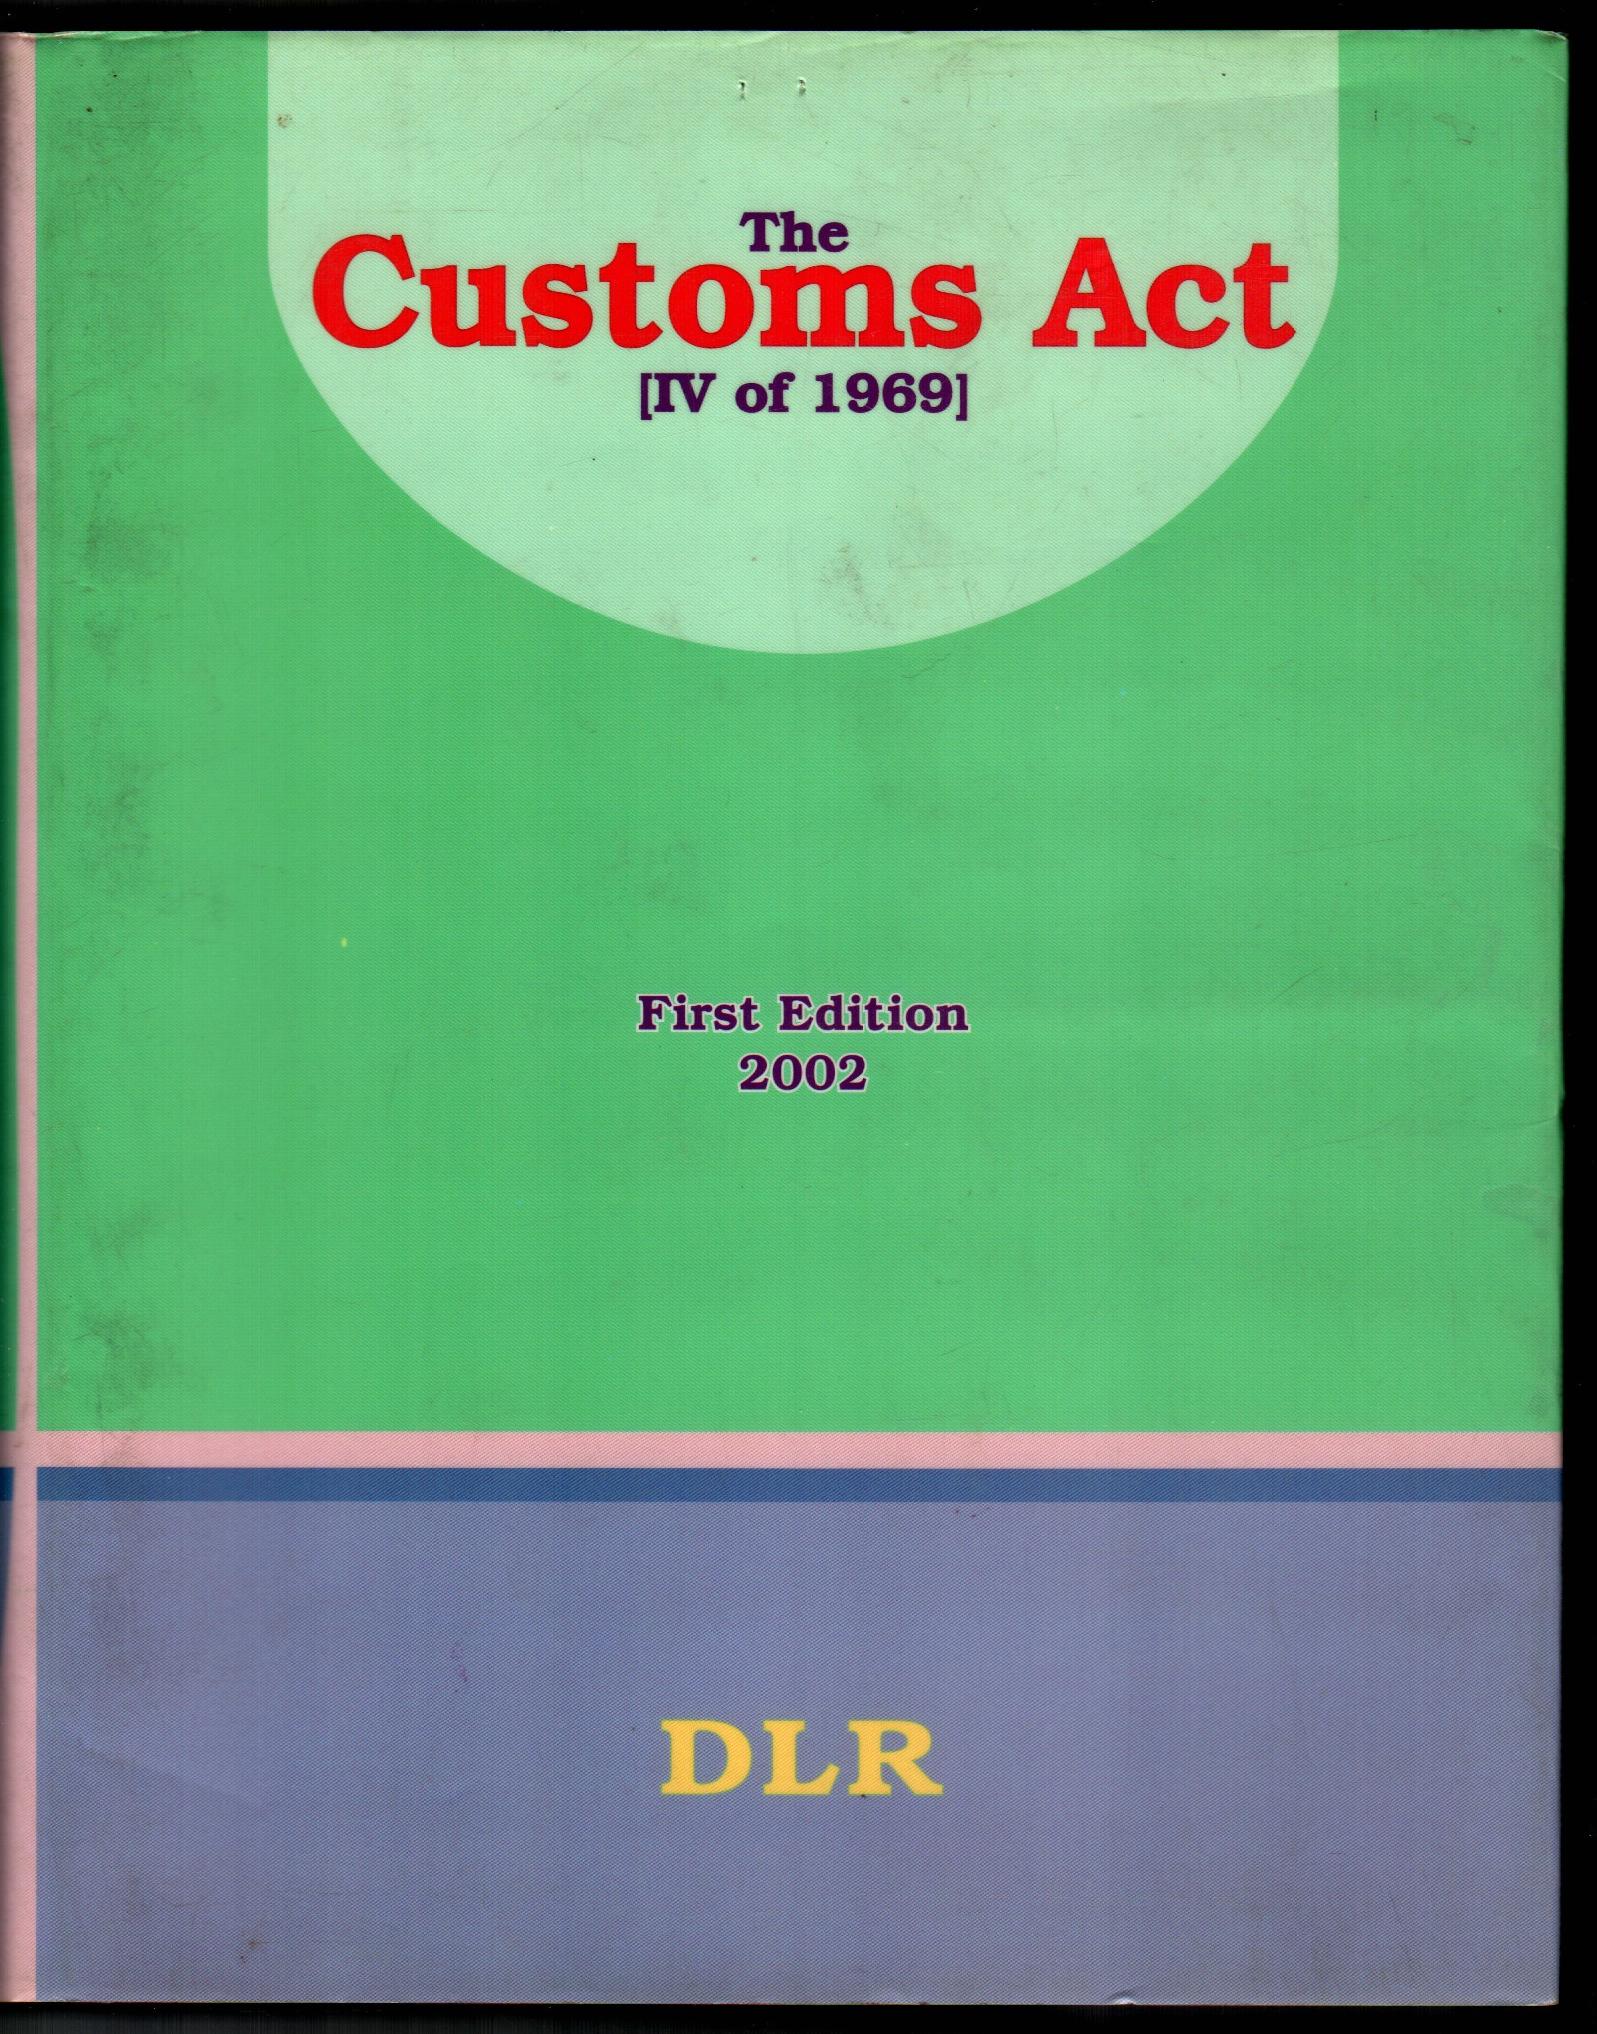 The Customs Act, DLR